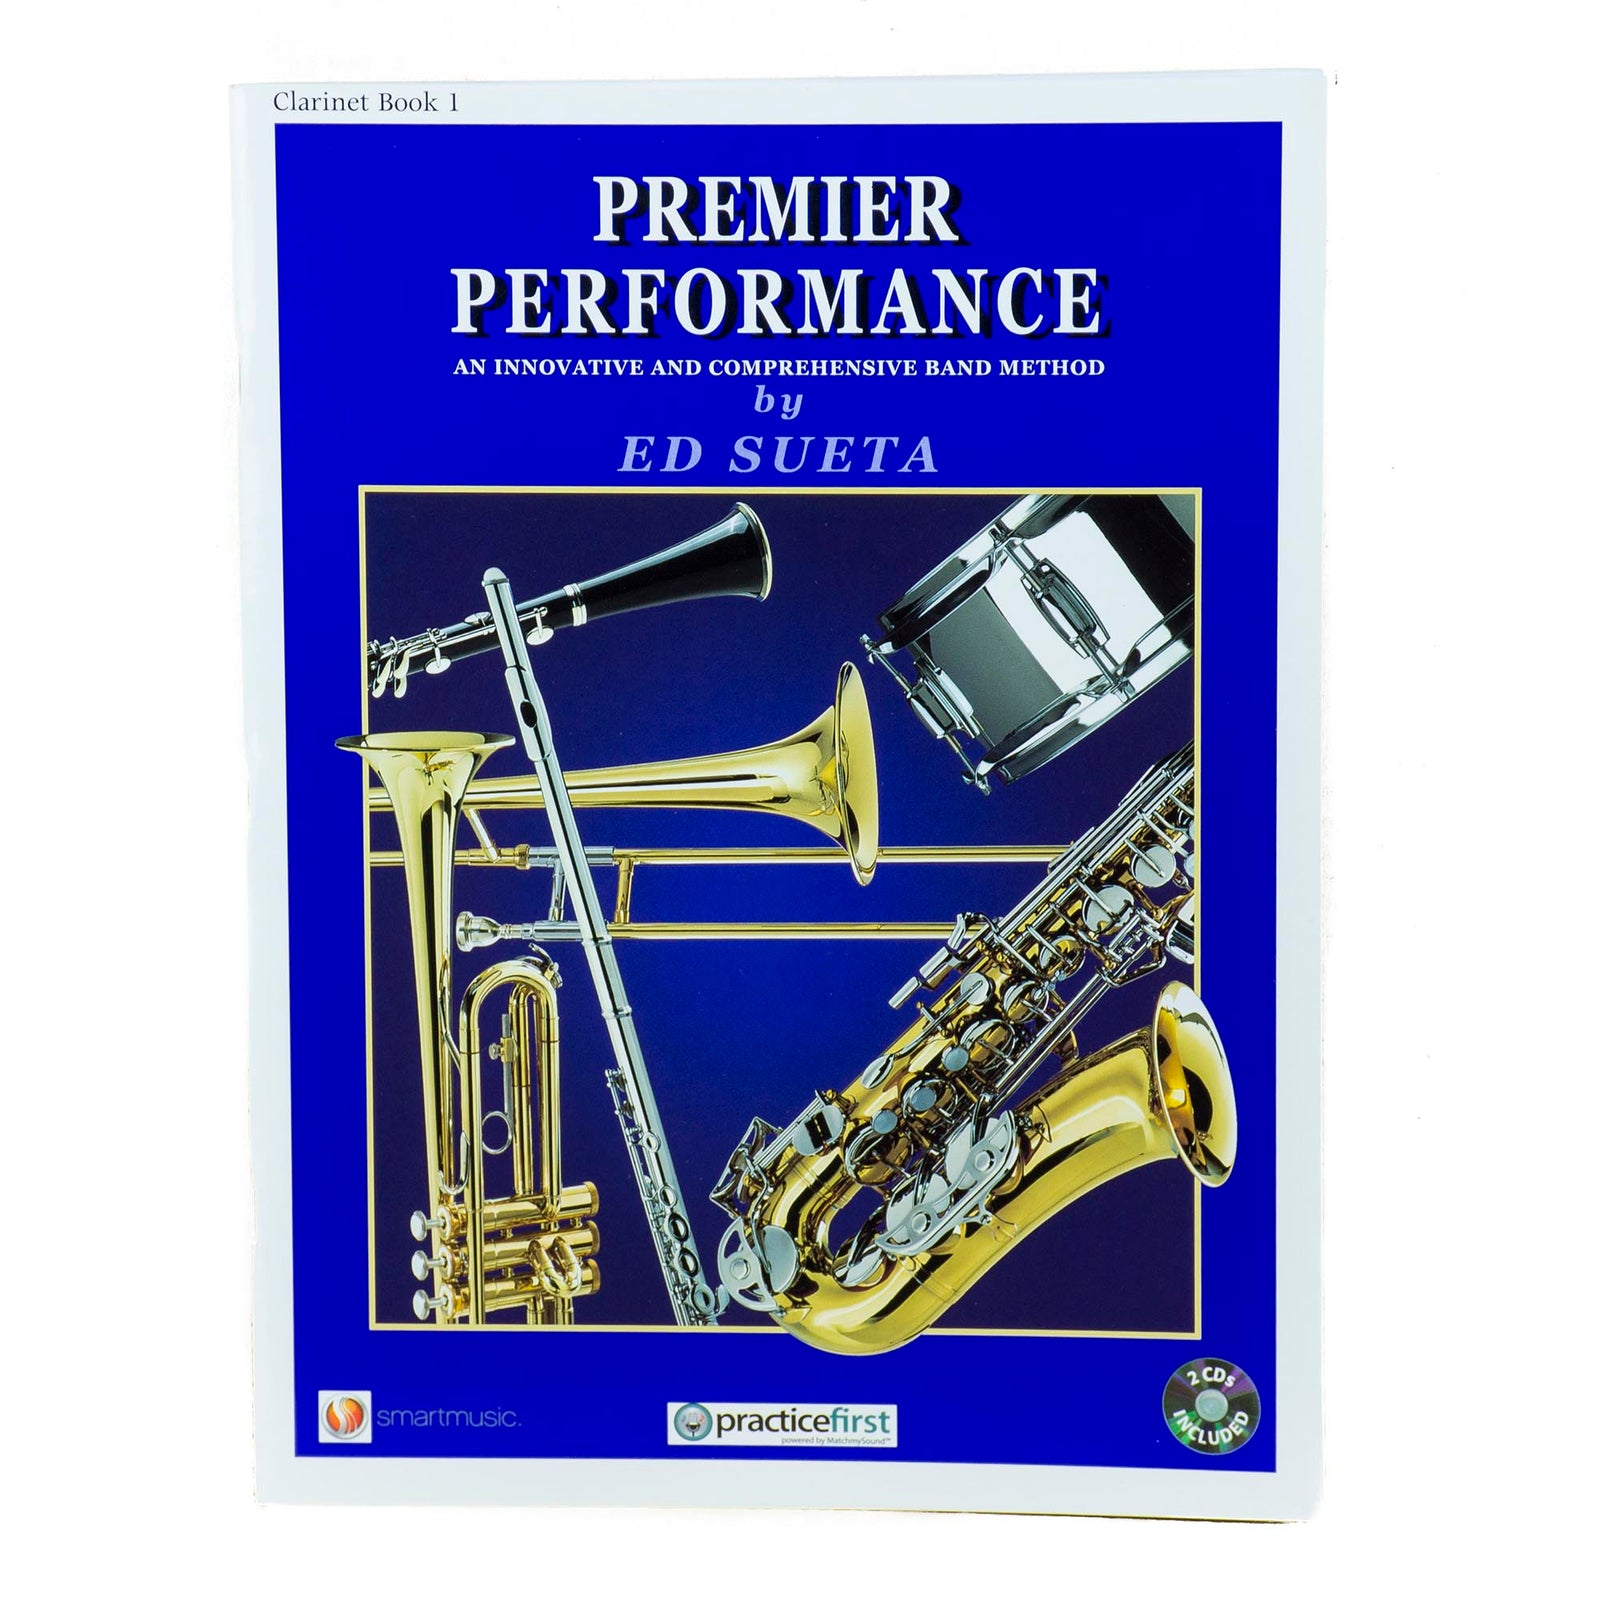 Premier Performance Clarinet Book 1 With CD